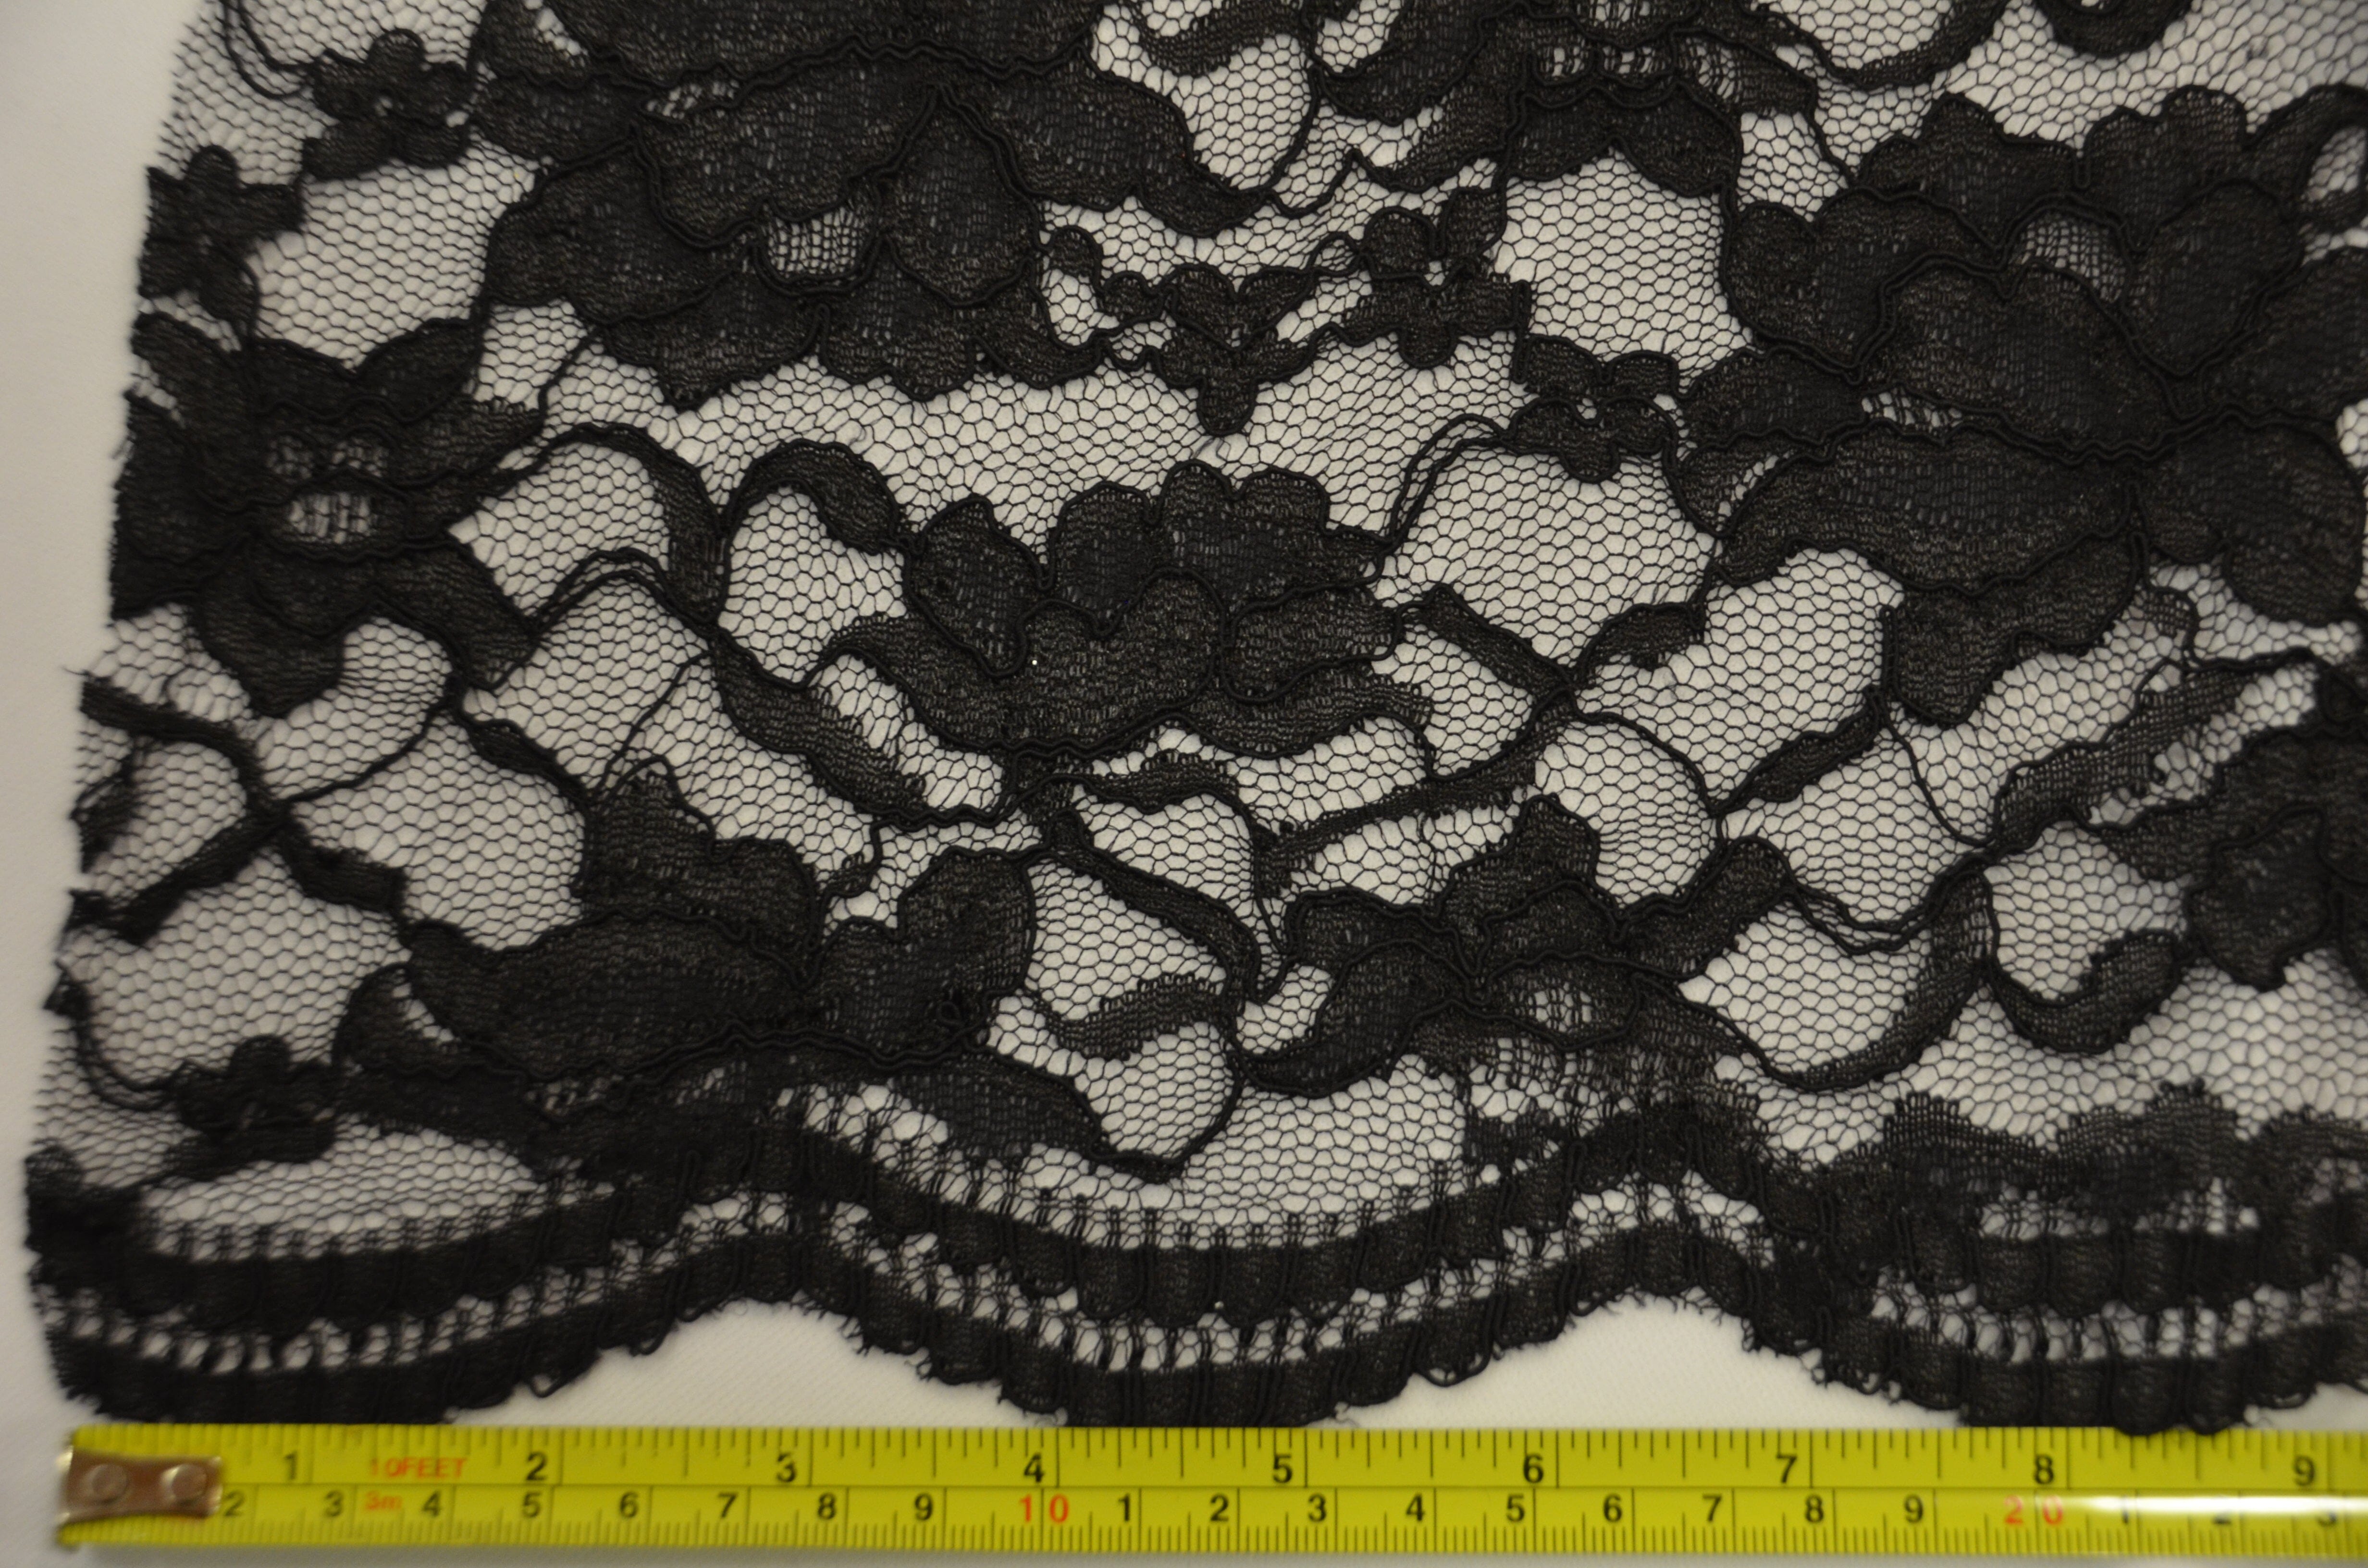 Black Lace Fabric | Double Sided Scalloped Lace in Black | Heavy Scallop Lace | 6 oz | 58/60" Wide | Fabric newtextilefabric 